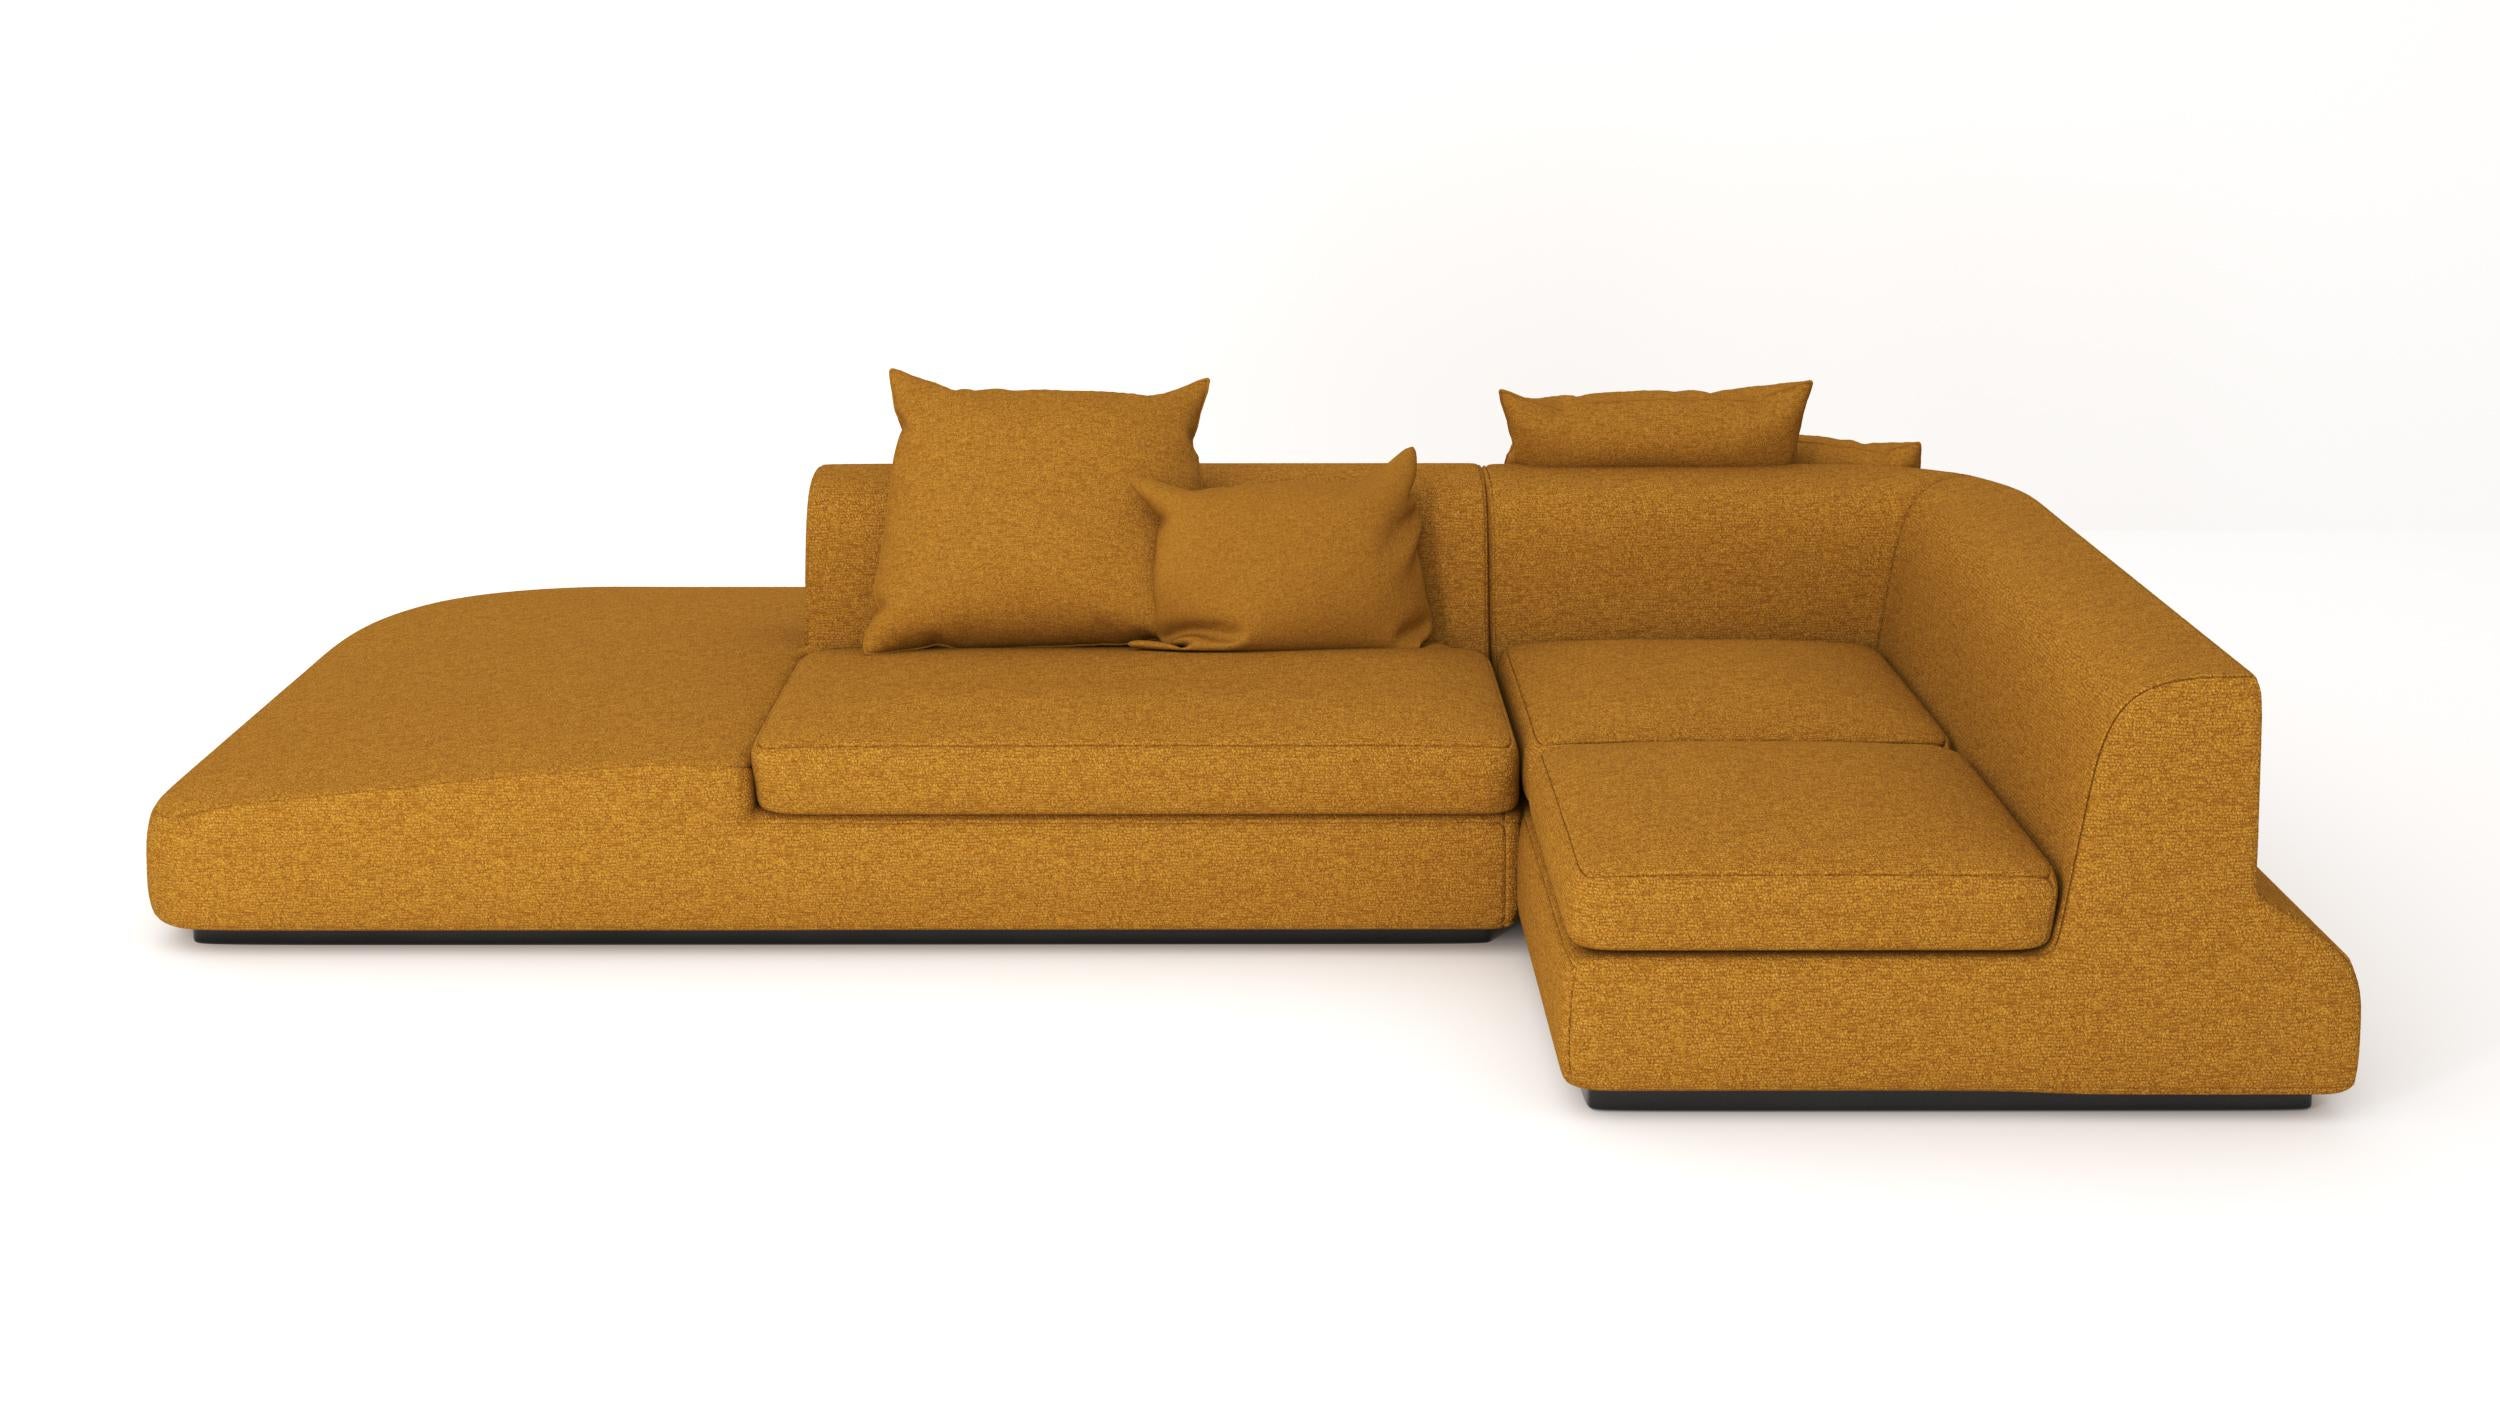 Modular Sofa Slope by Andrea Steidl for Delvis Unlimited In New Condition For Sale In Milan, Milan